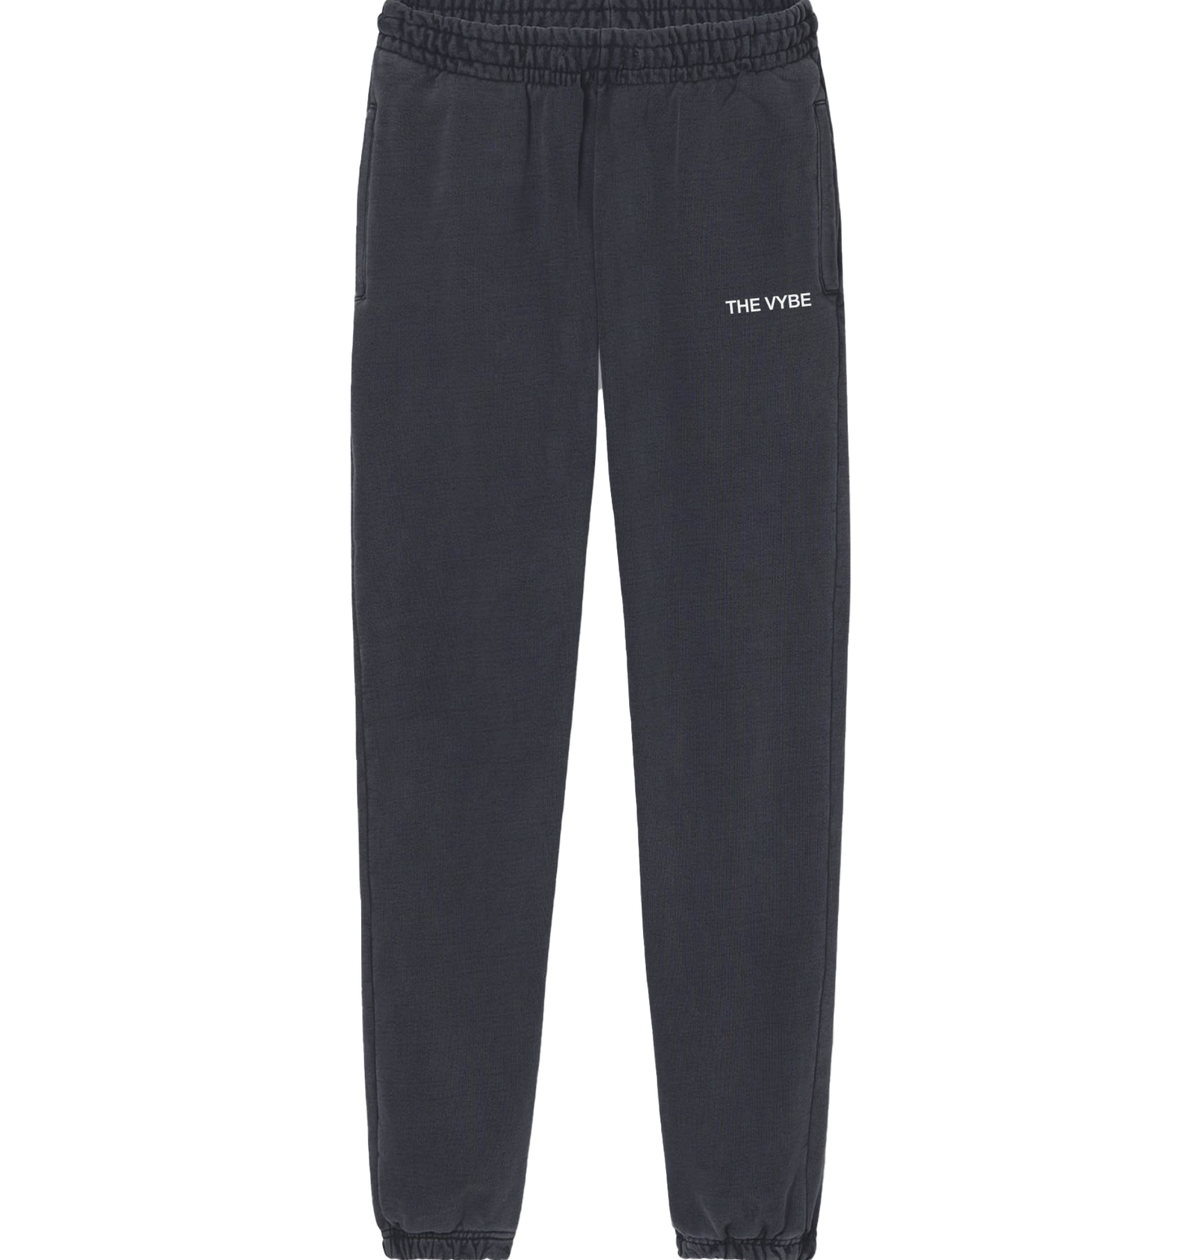 THE VYBE Sweatpants